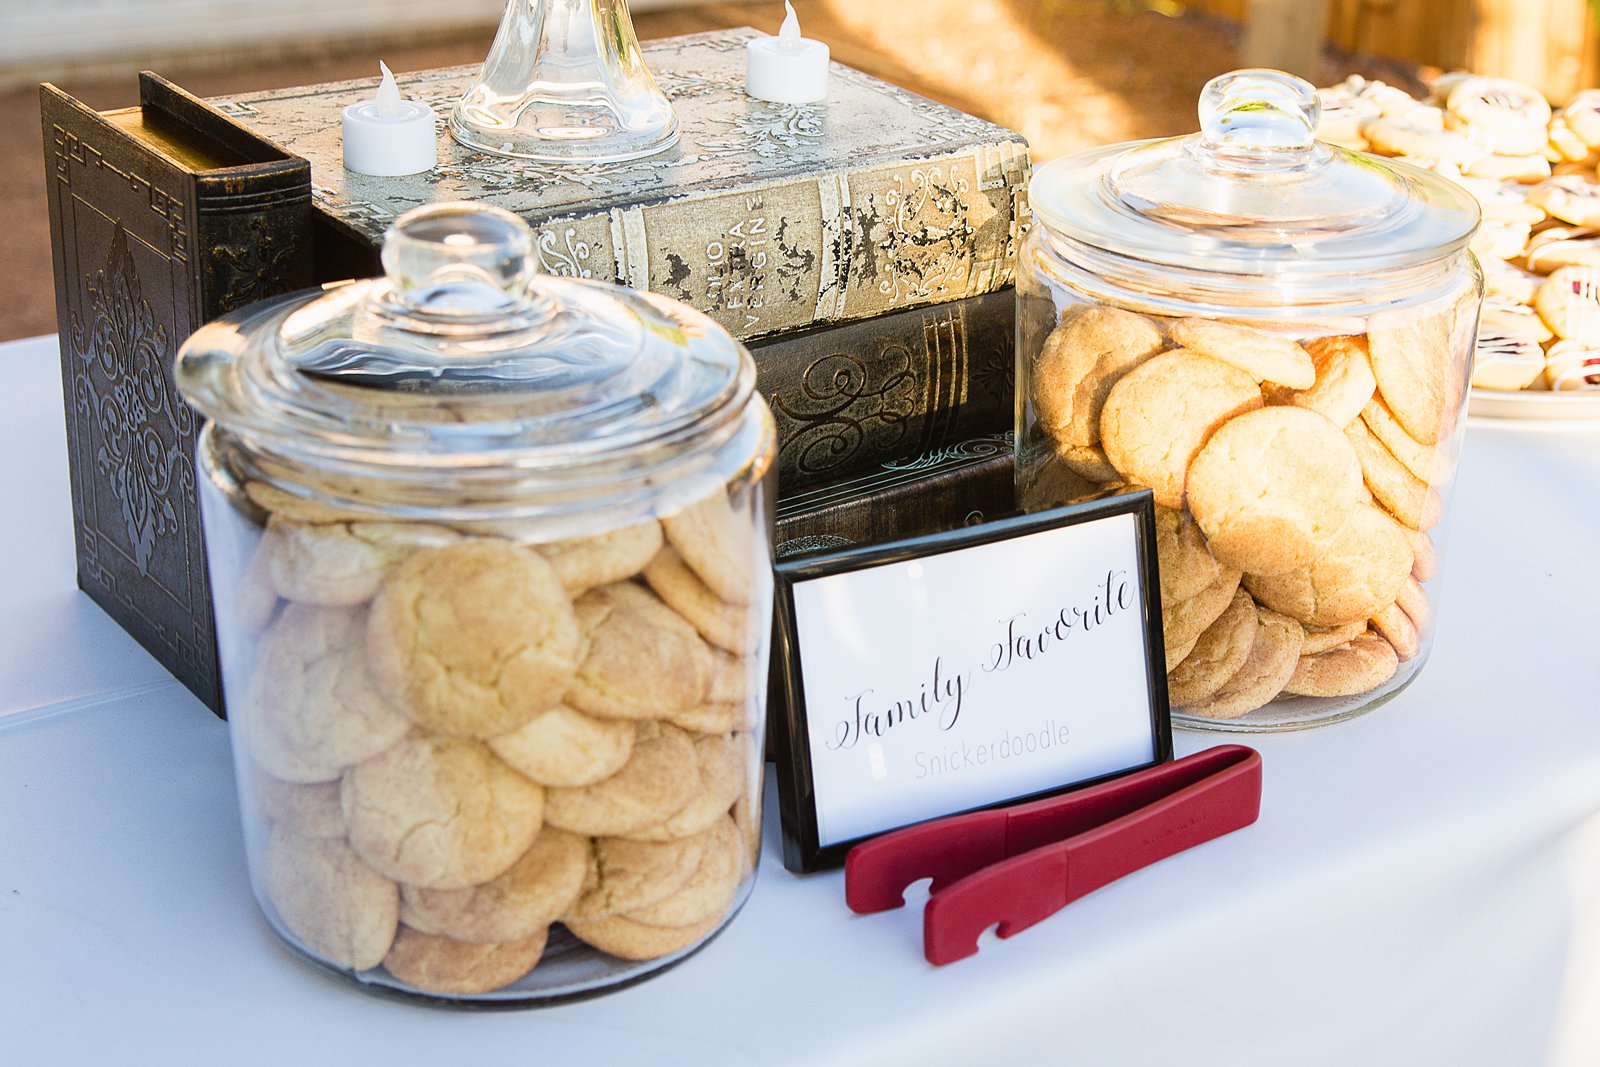 Family favorite cookies for a wedding desert table by PMA Photography.